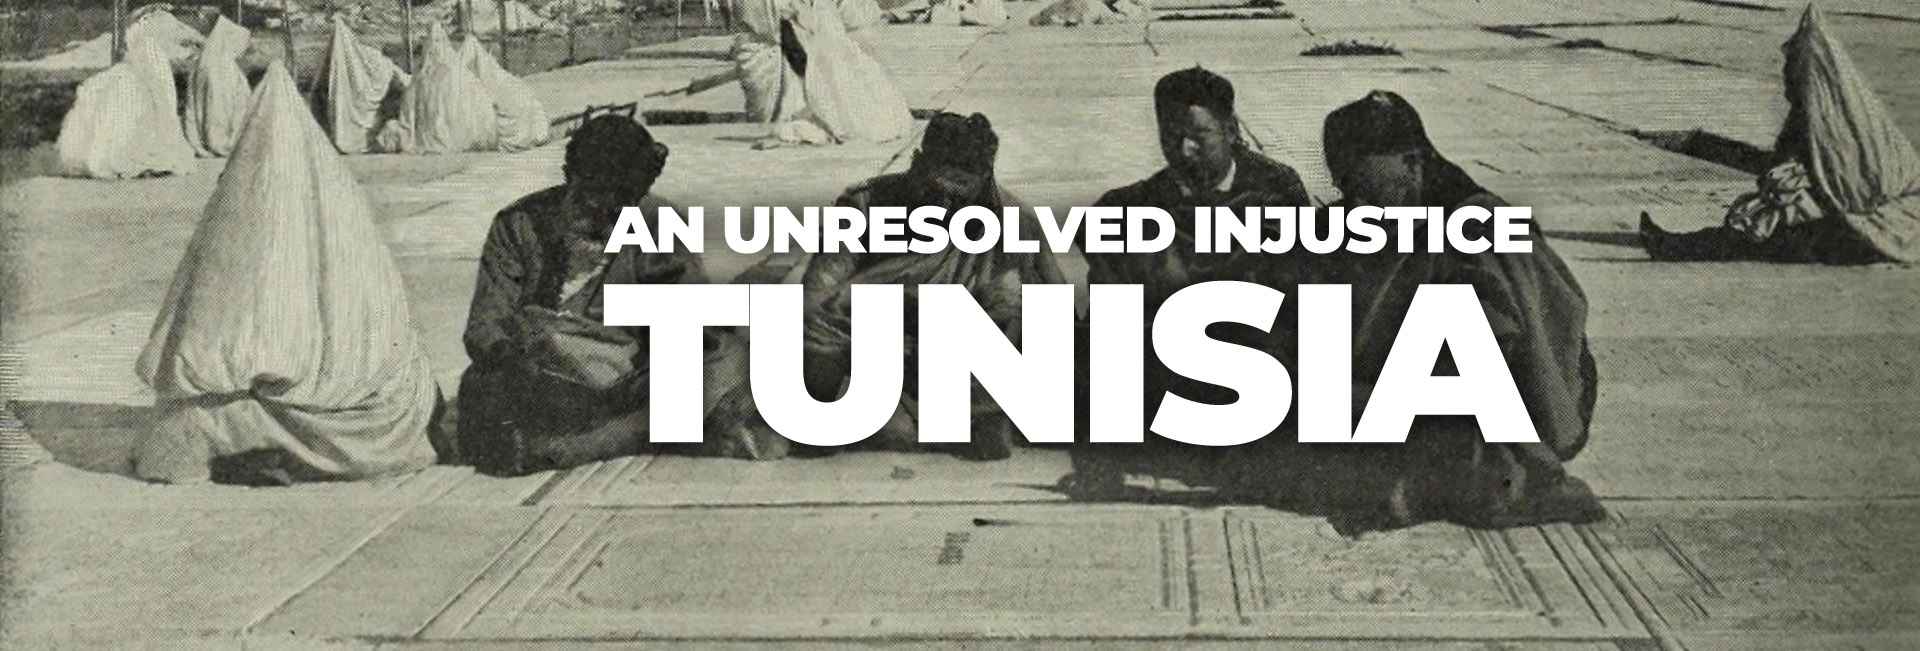 An Unresolved Injustice – Tunisia